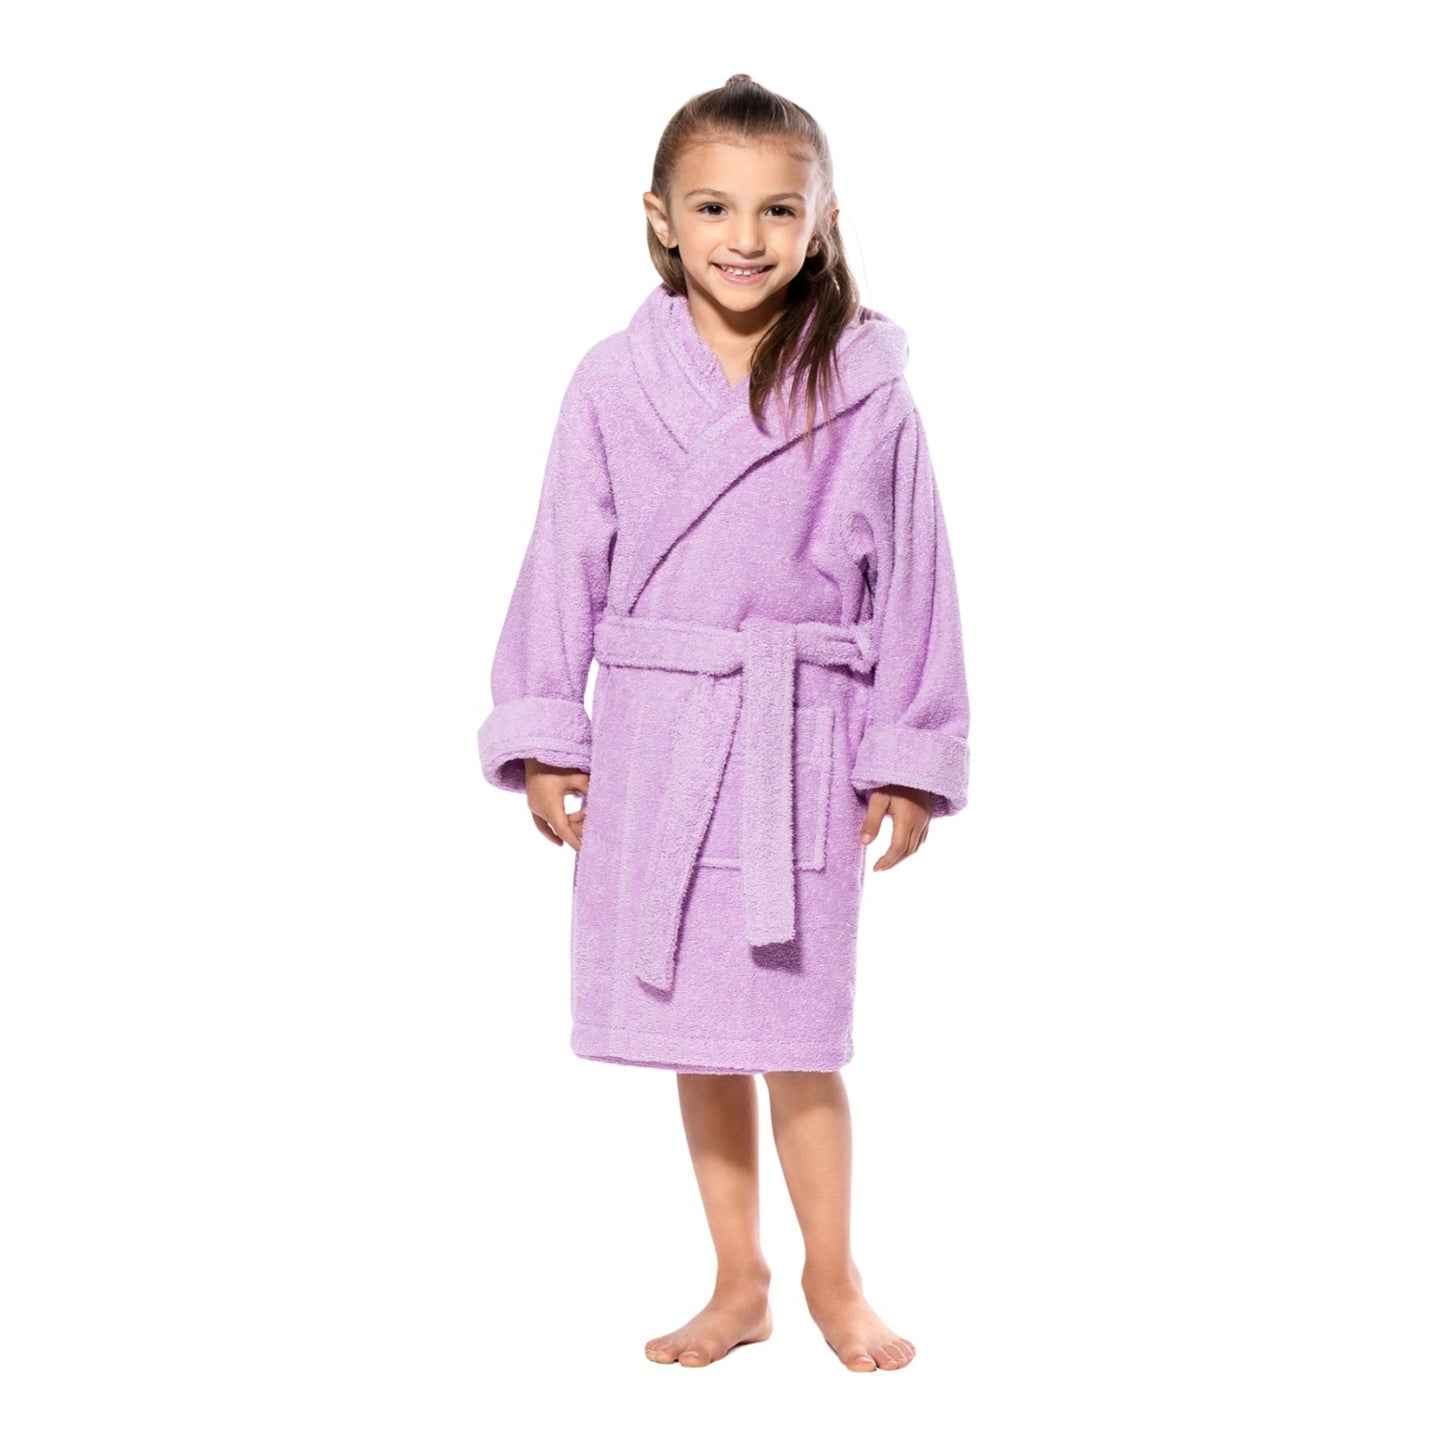 Terrycloth Spa Robe for Kids